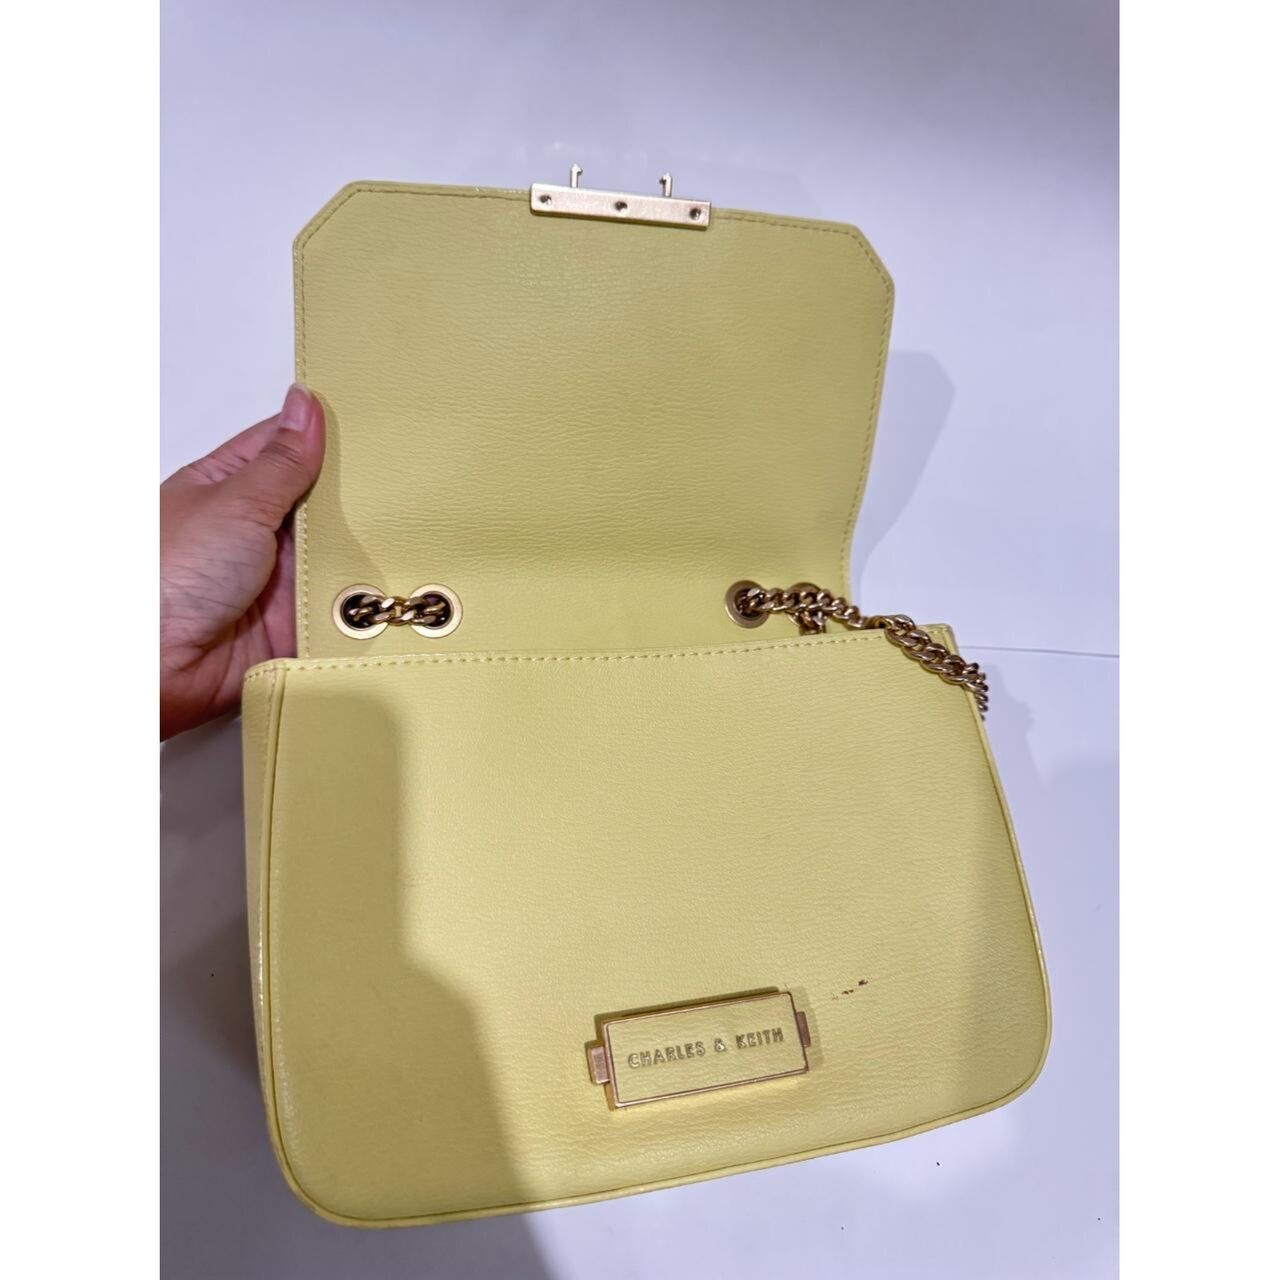 Charles & Keith Chain Strap Shoulder Bag - Butter